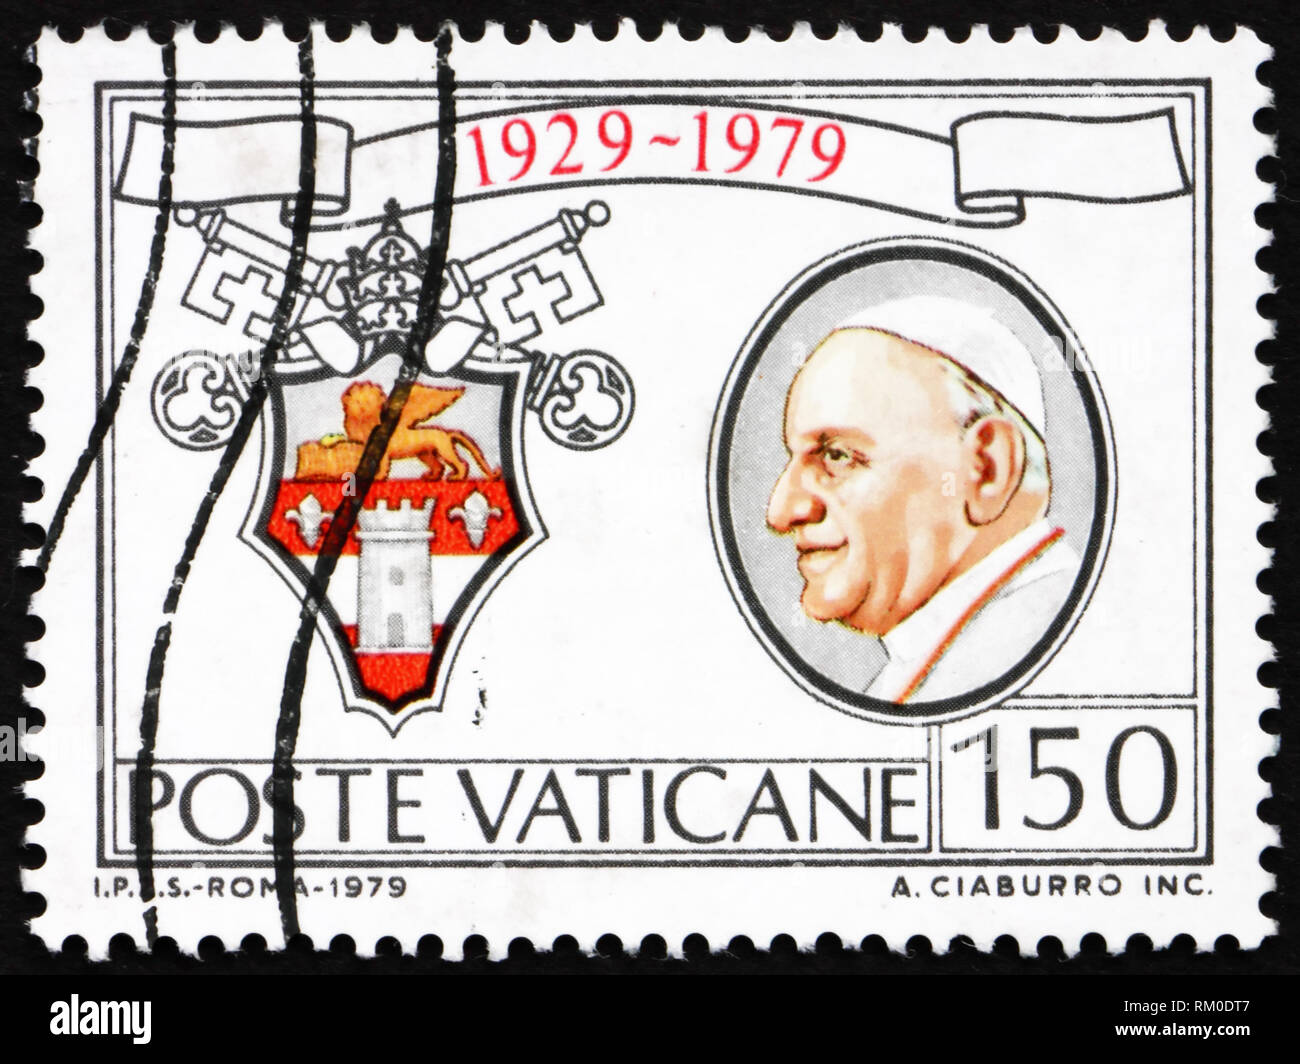 VATICAN - CIRCA 1979: a stamp printed in the Vatican shows Blessed Pope John XXIII, Angelo Giuseppe Roncalli, circa 1979 Stock Photo